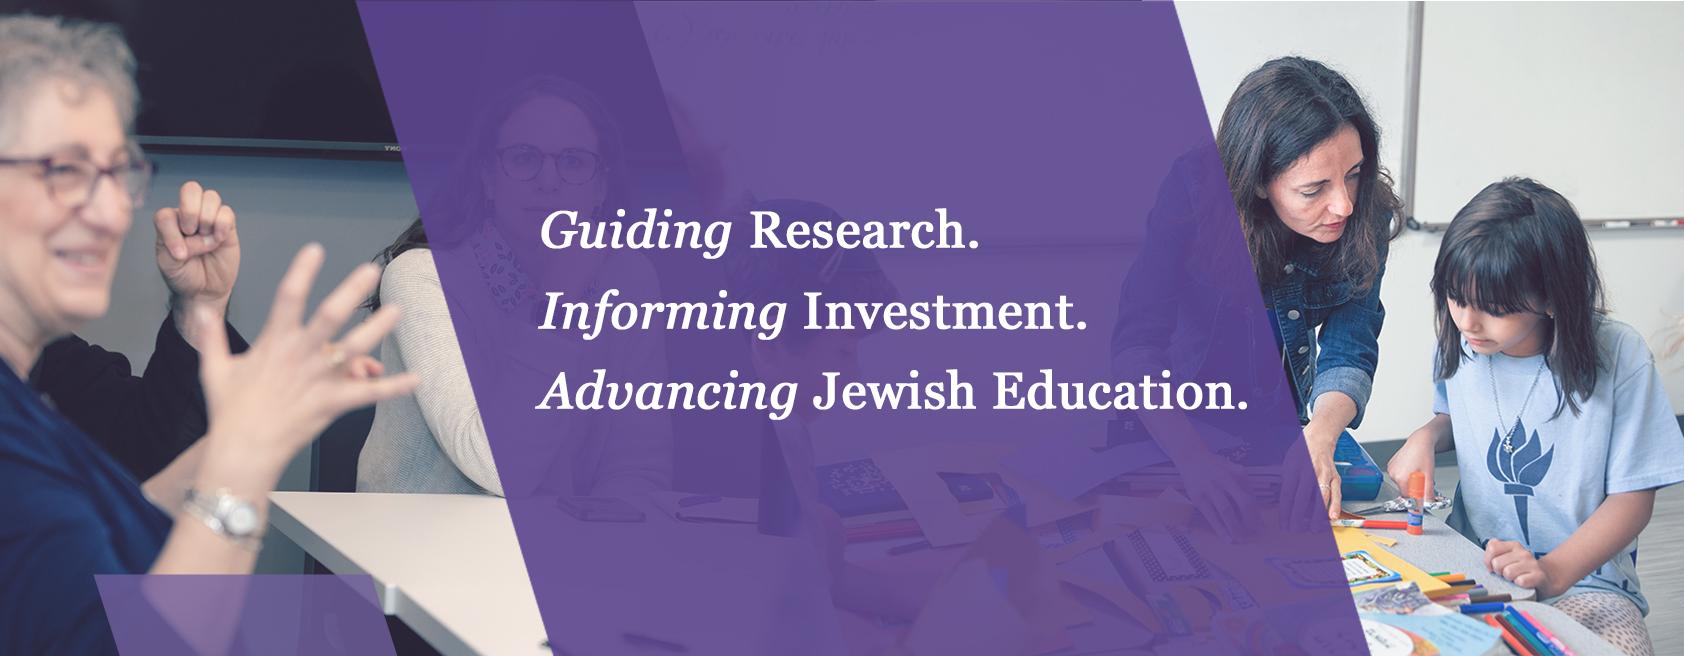 Decorative header that includes two photos. The first photo is of a Jewish professional speaking at a table. The second is of a teacher helping a student. A purple overlay reads "Guiding Research. Informing Investment. Advancing Jewish Education."